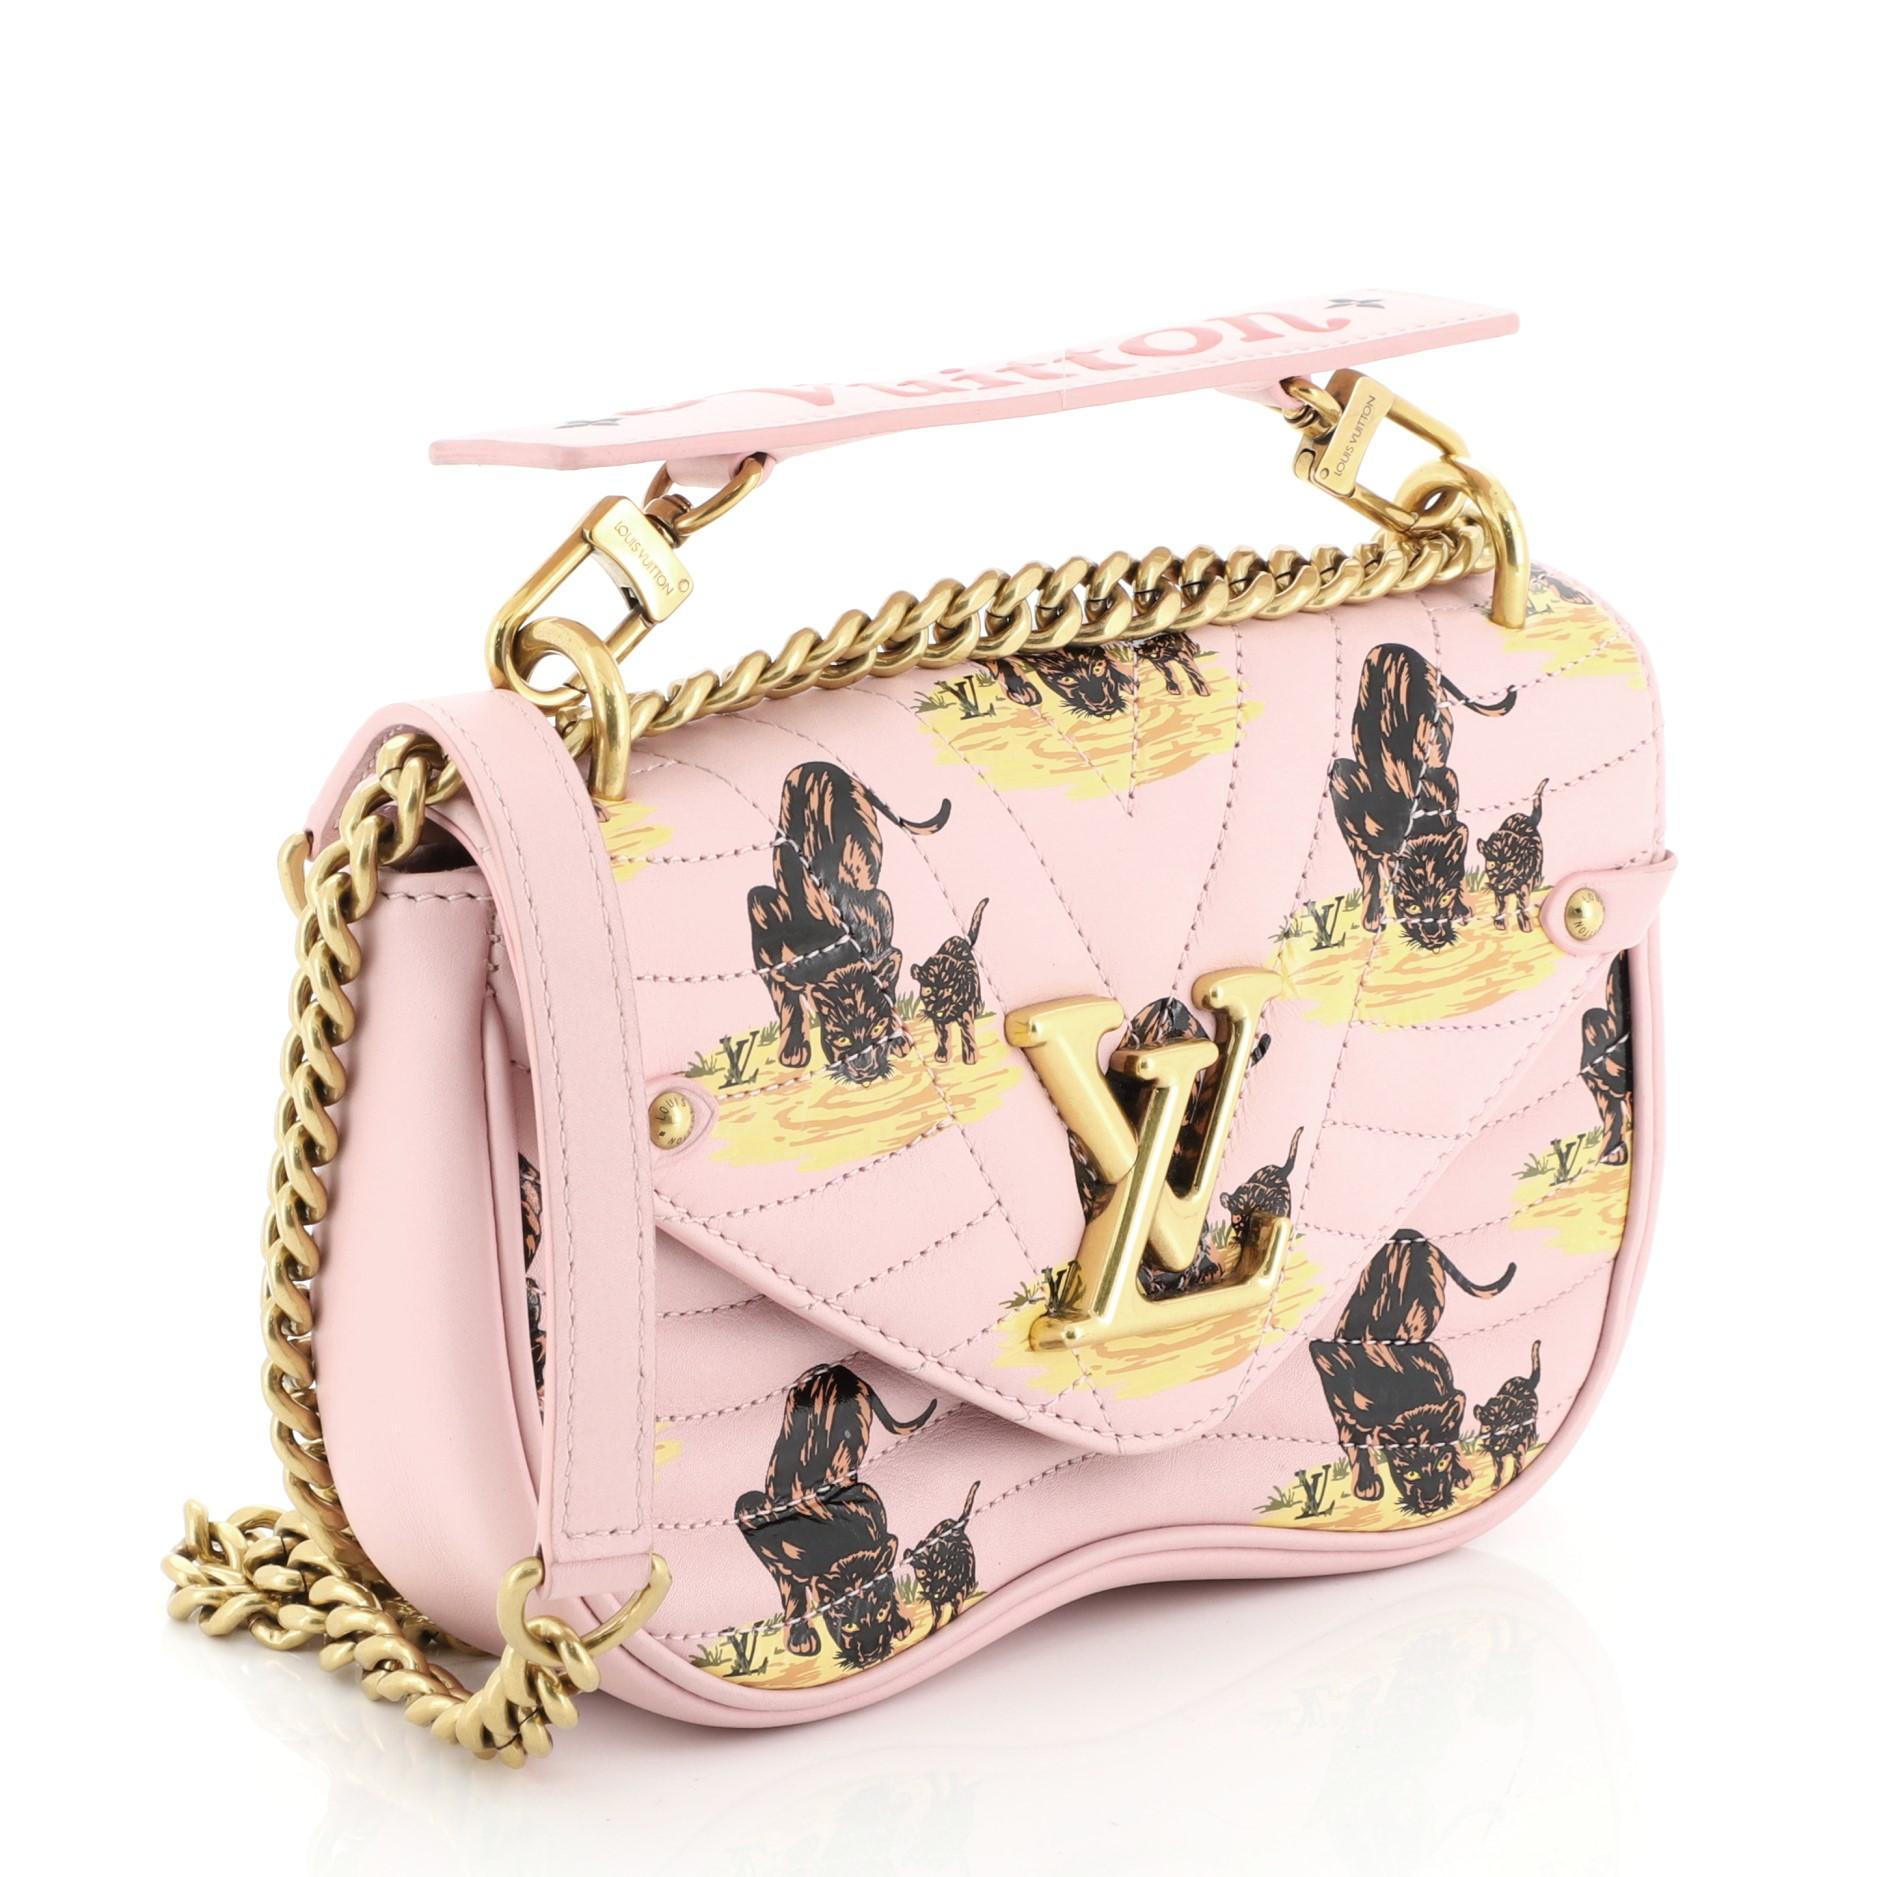 This Louis Vuitton New Wave Chain Bag Limited Edition Printed Quilted Leather PM, crafted from pink printed leather, features sliding chain-link shoulder strap with leather pad, detachable handle signed “Louis Vuitton,” and gold-tone hardware. It